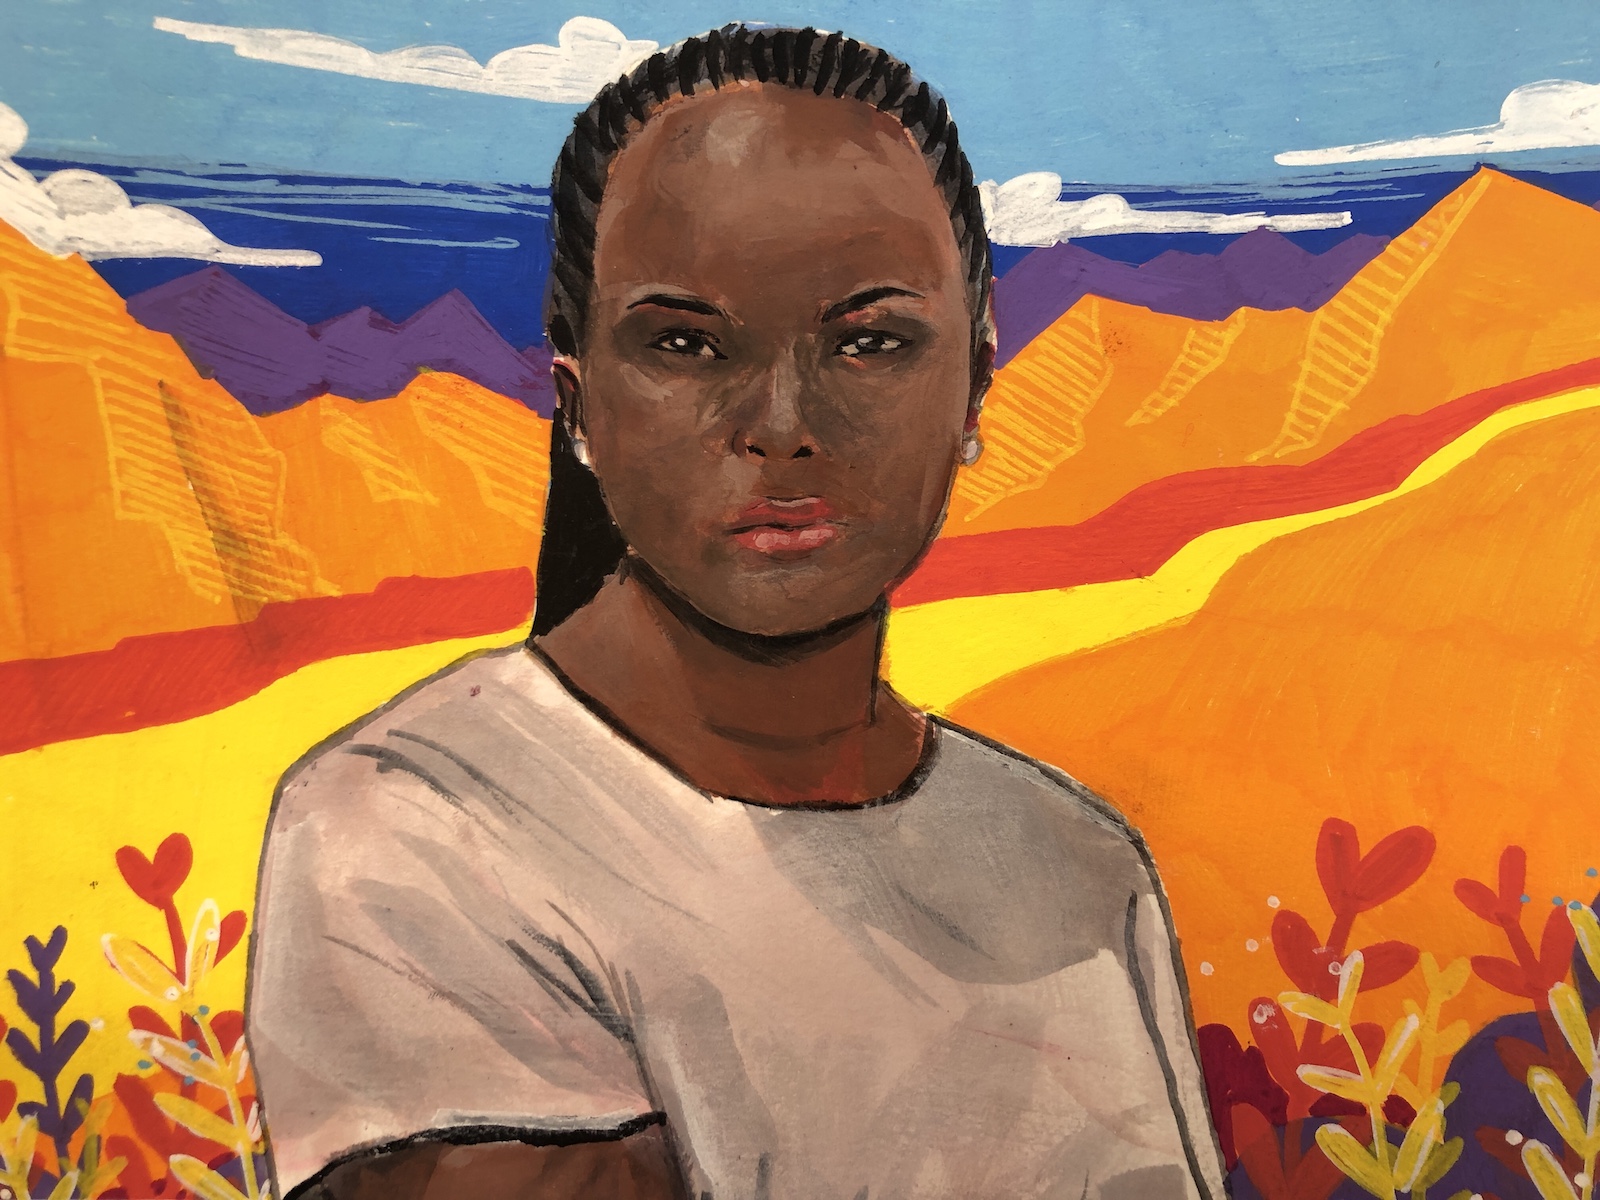 a young black woman in front of orange mountains